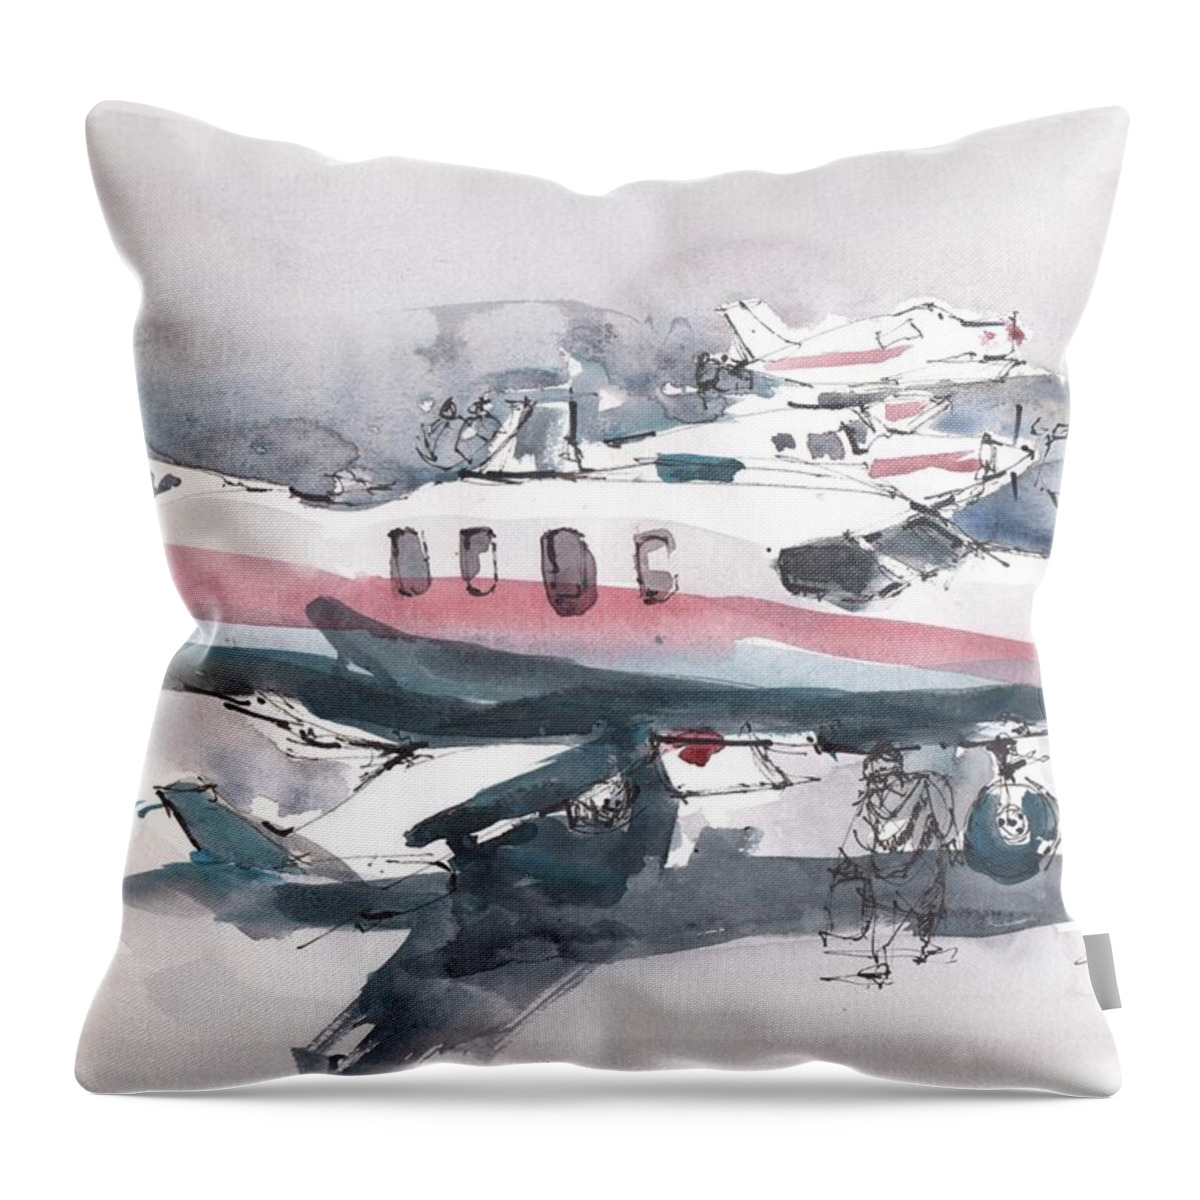  Throw Pillow featuring the painting St Pete Aerodrome Sketch by Gaston McKenzie